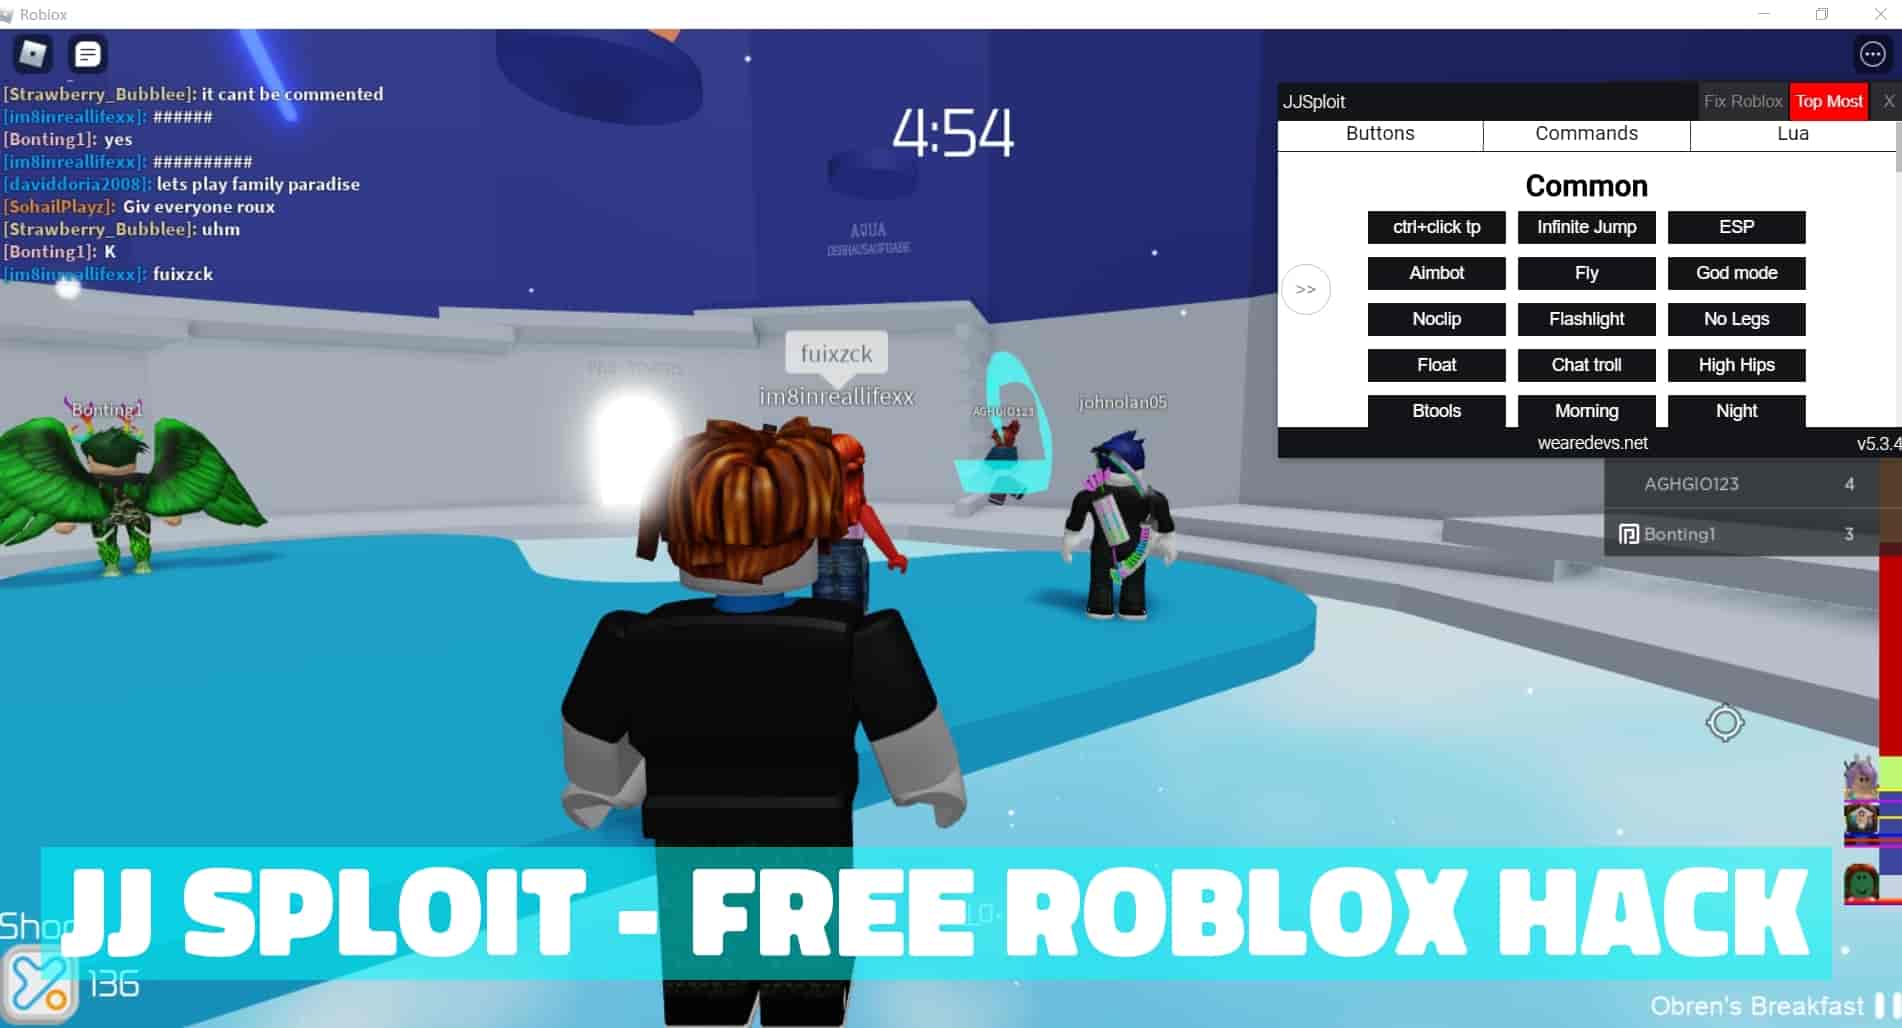 Latest Jjsploit Roblox Free Hacks Working Exploit For Roblox Undetected Gaming Aspect - tampermonkey hacks for roblox